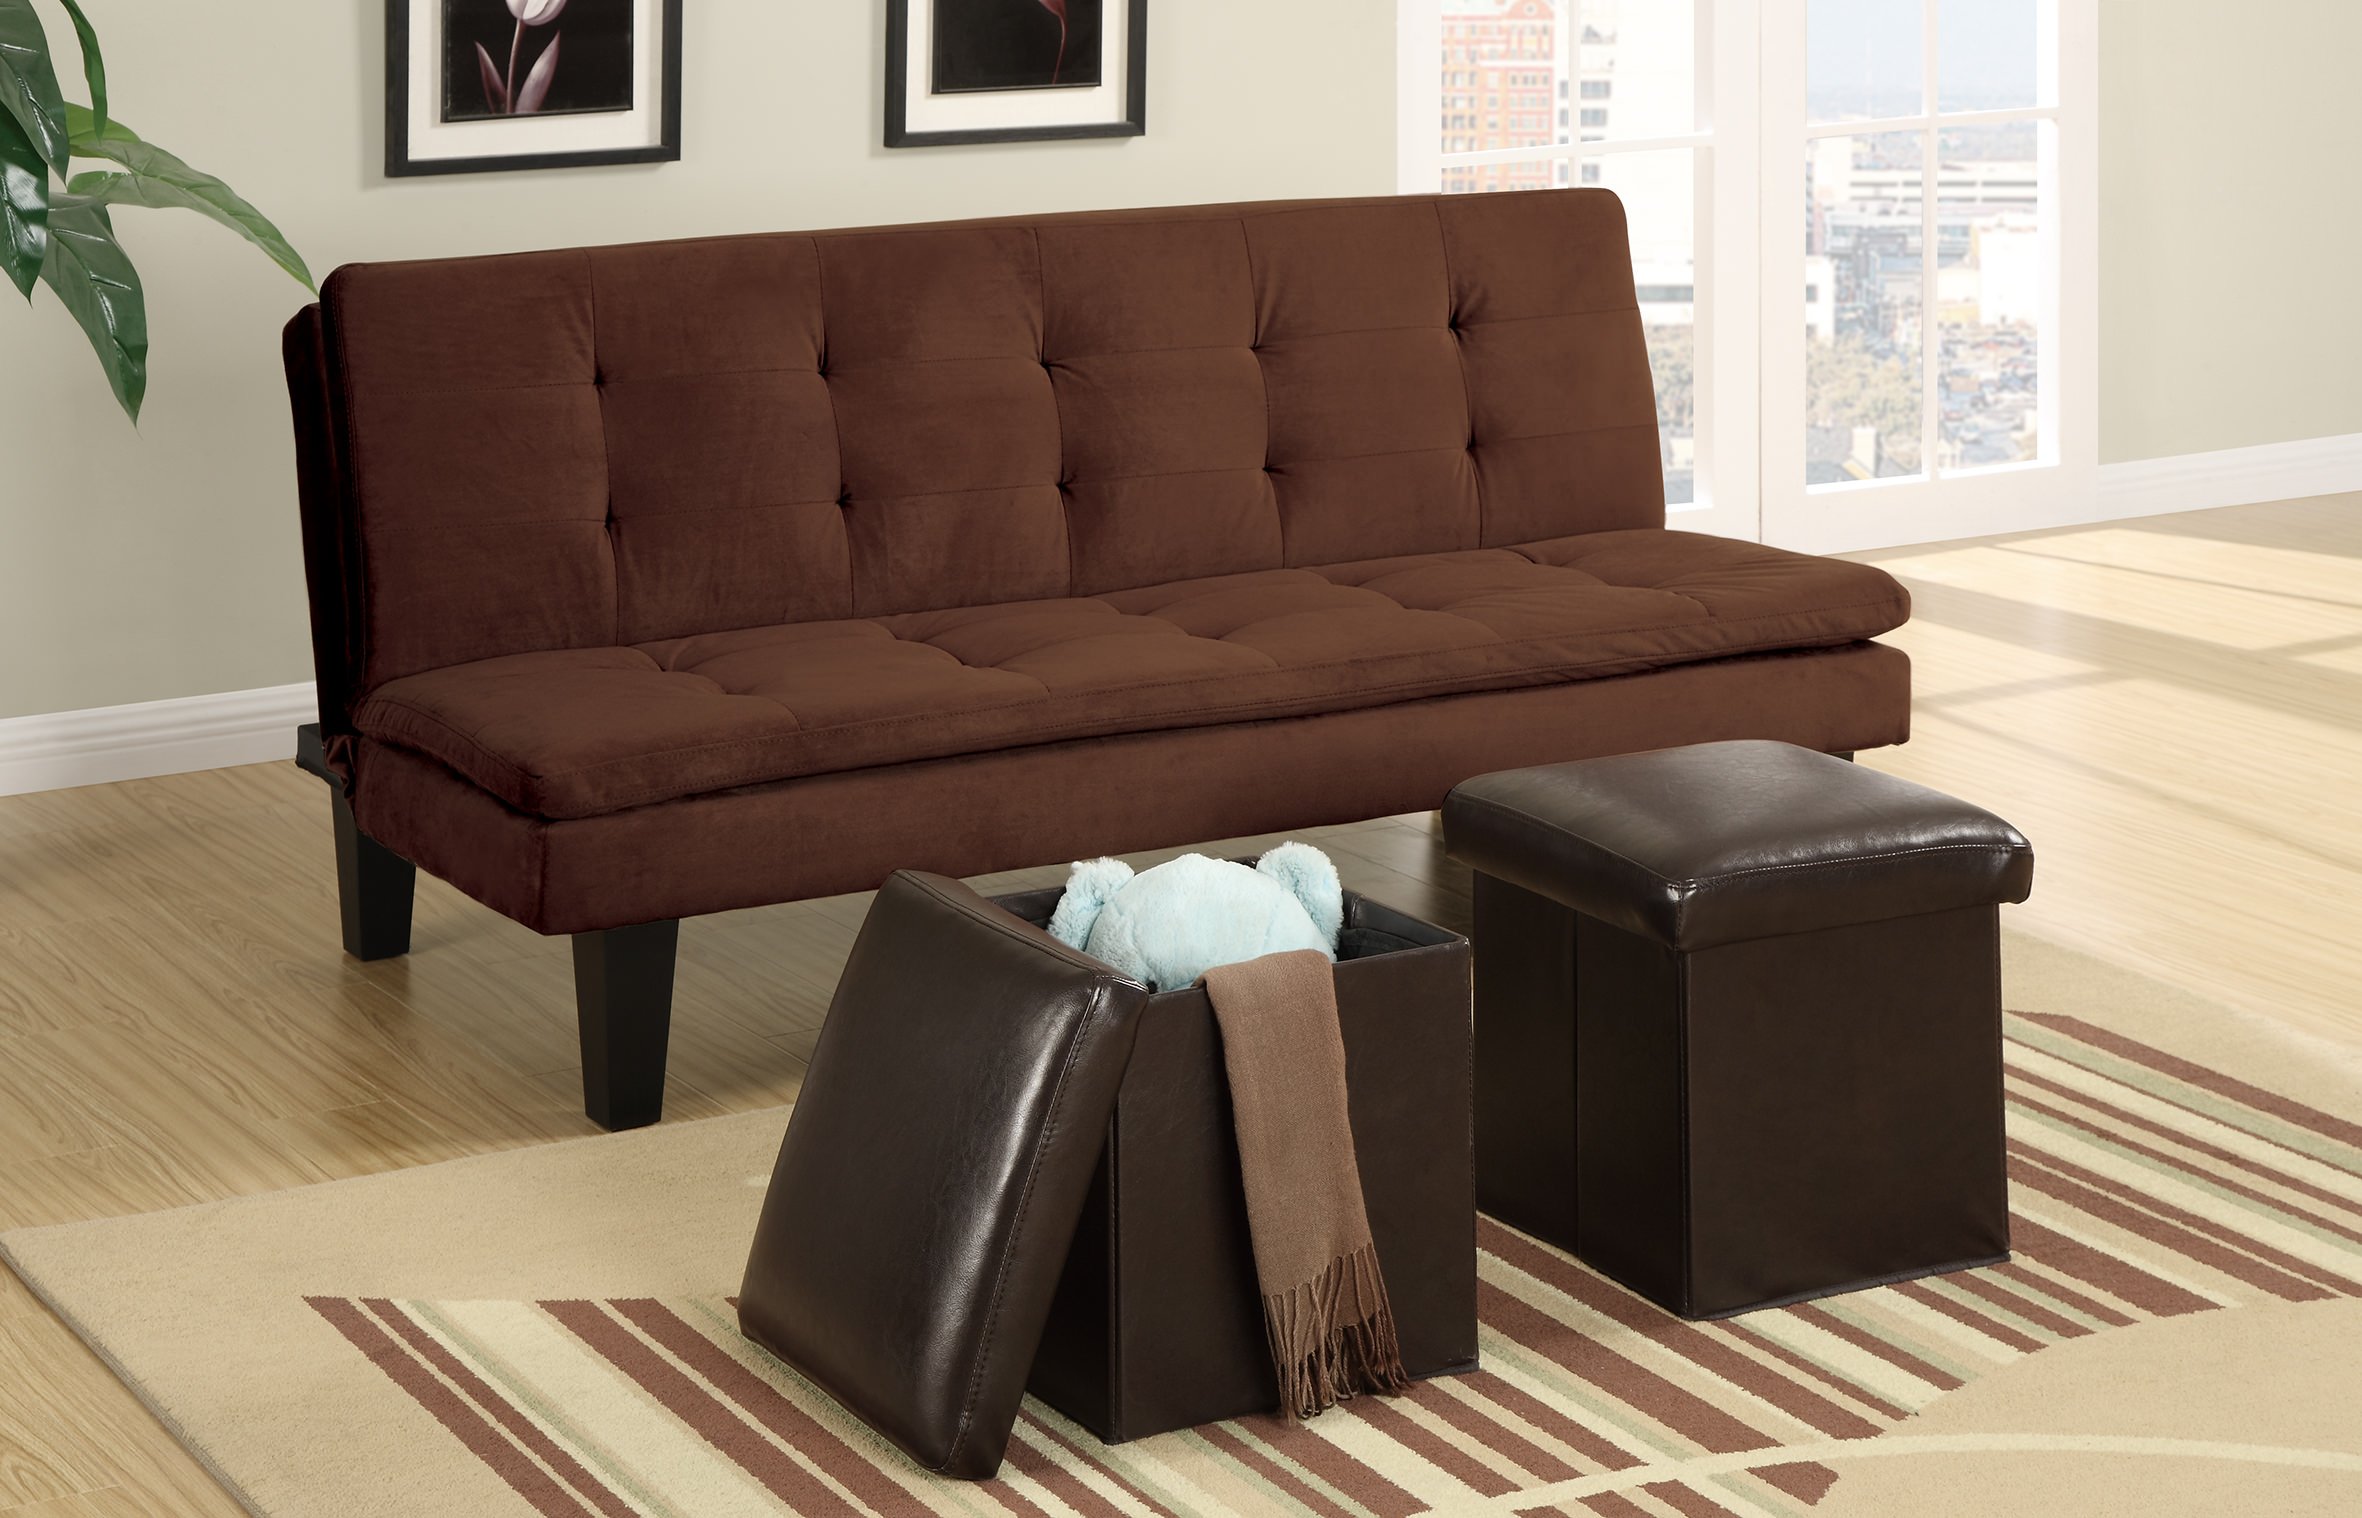 F7196 Chocolate Convertible Sofa Bed with 2 Pcs Ottoman by Poundex